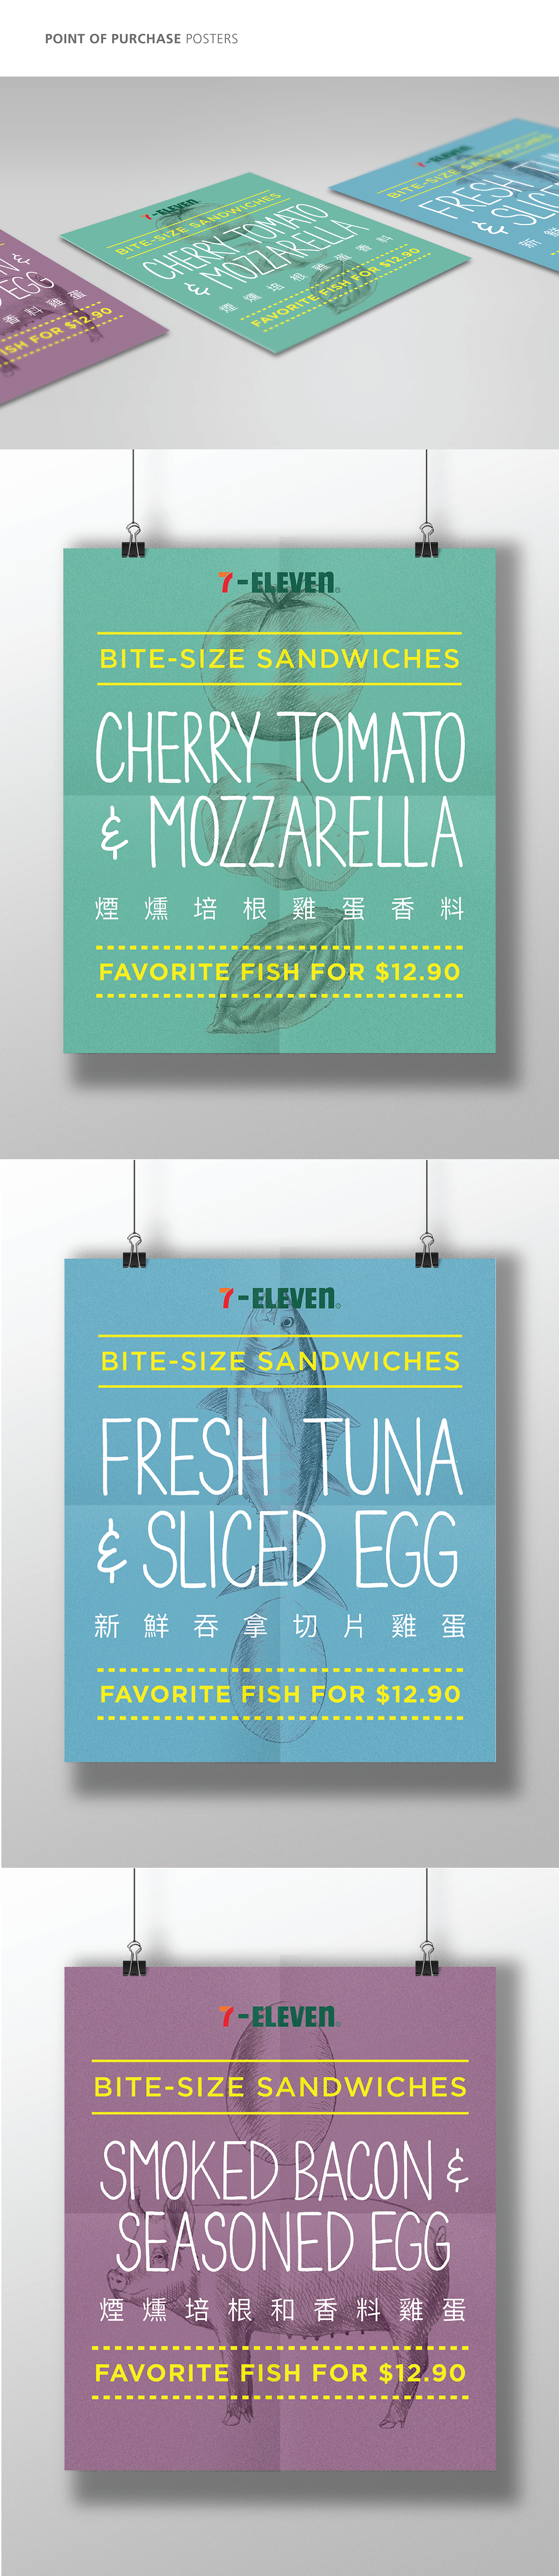 FMCG 7-Eleven Sandwiches package design drawings fresh Variety of Flavors egg bacon tuna fish meat Vegetarian